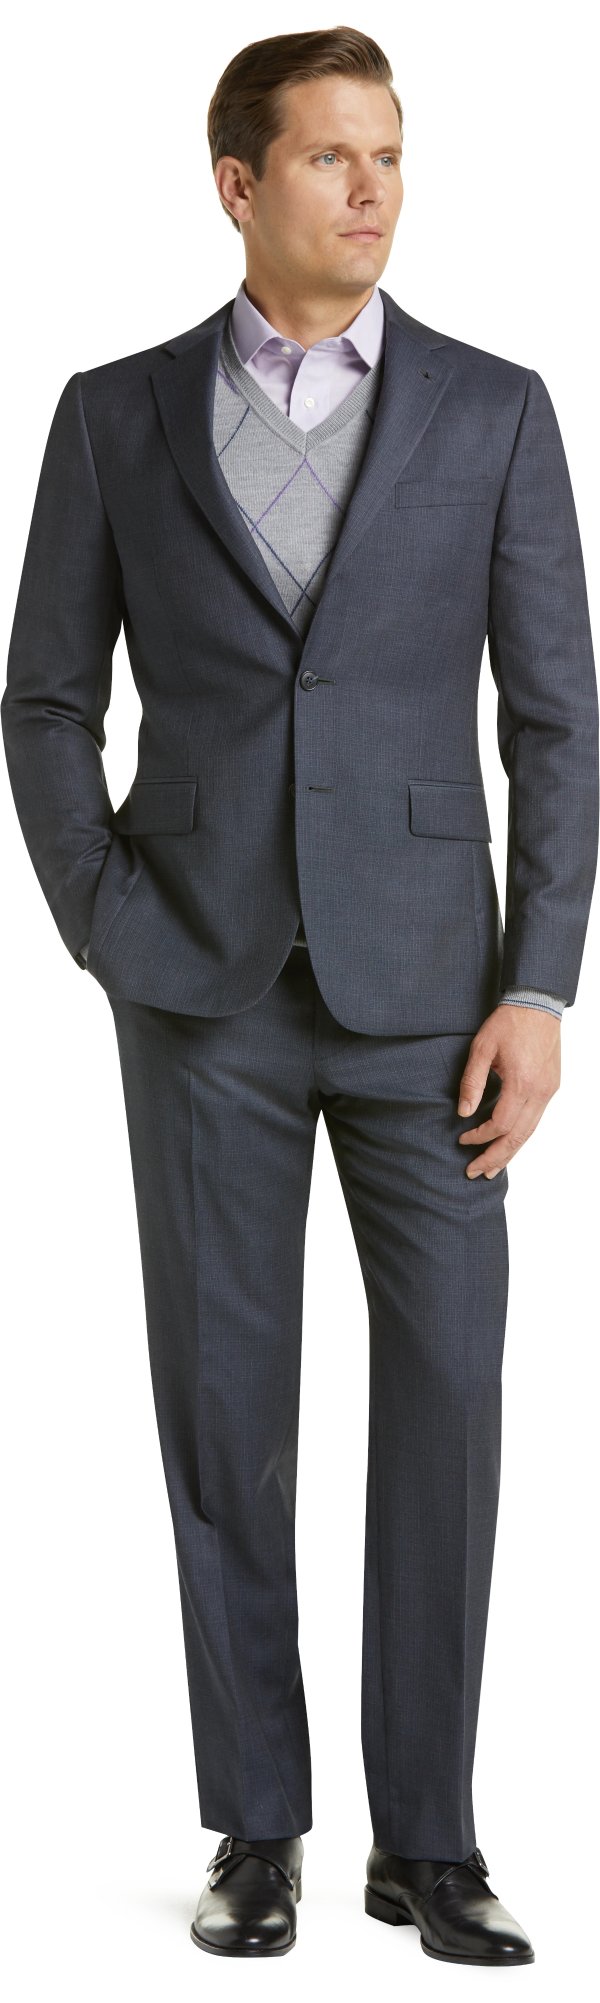 Traveler Collection Slim Fit Tic Weave Suit CLEARANCE - All Clearance | Jos A Bank